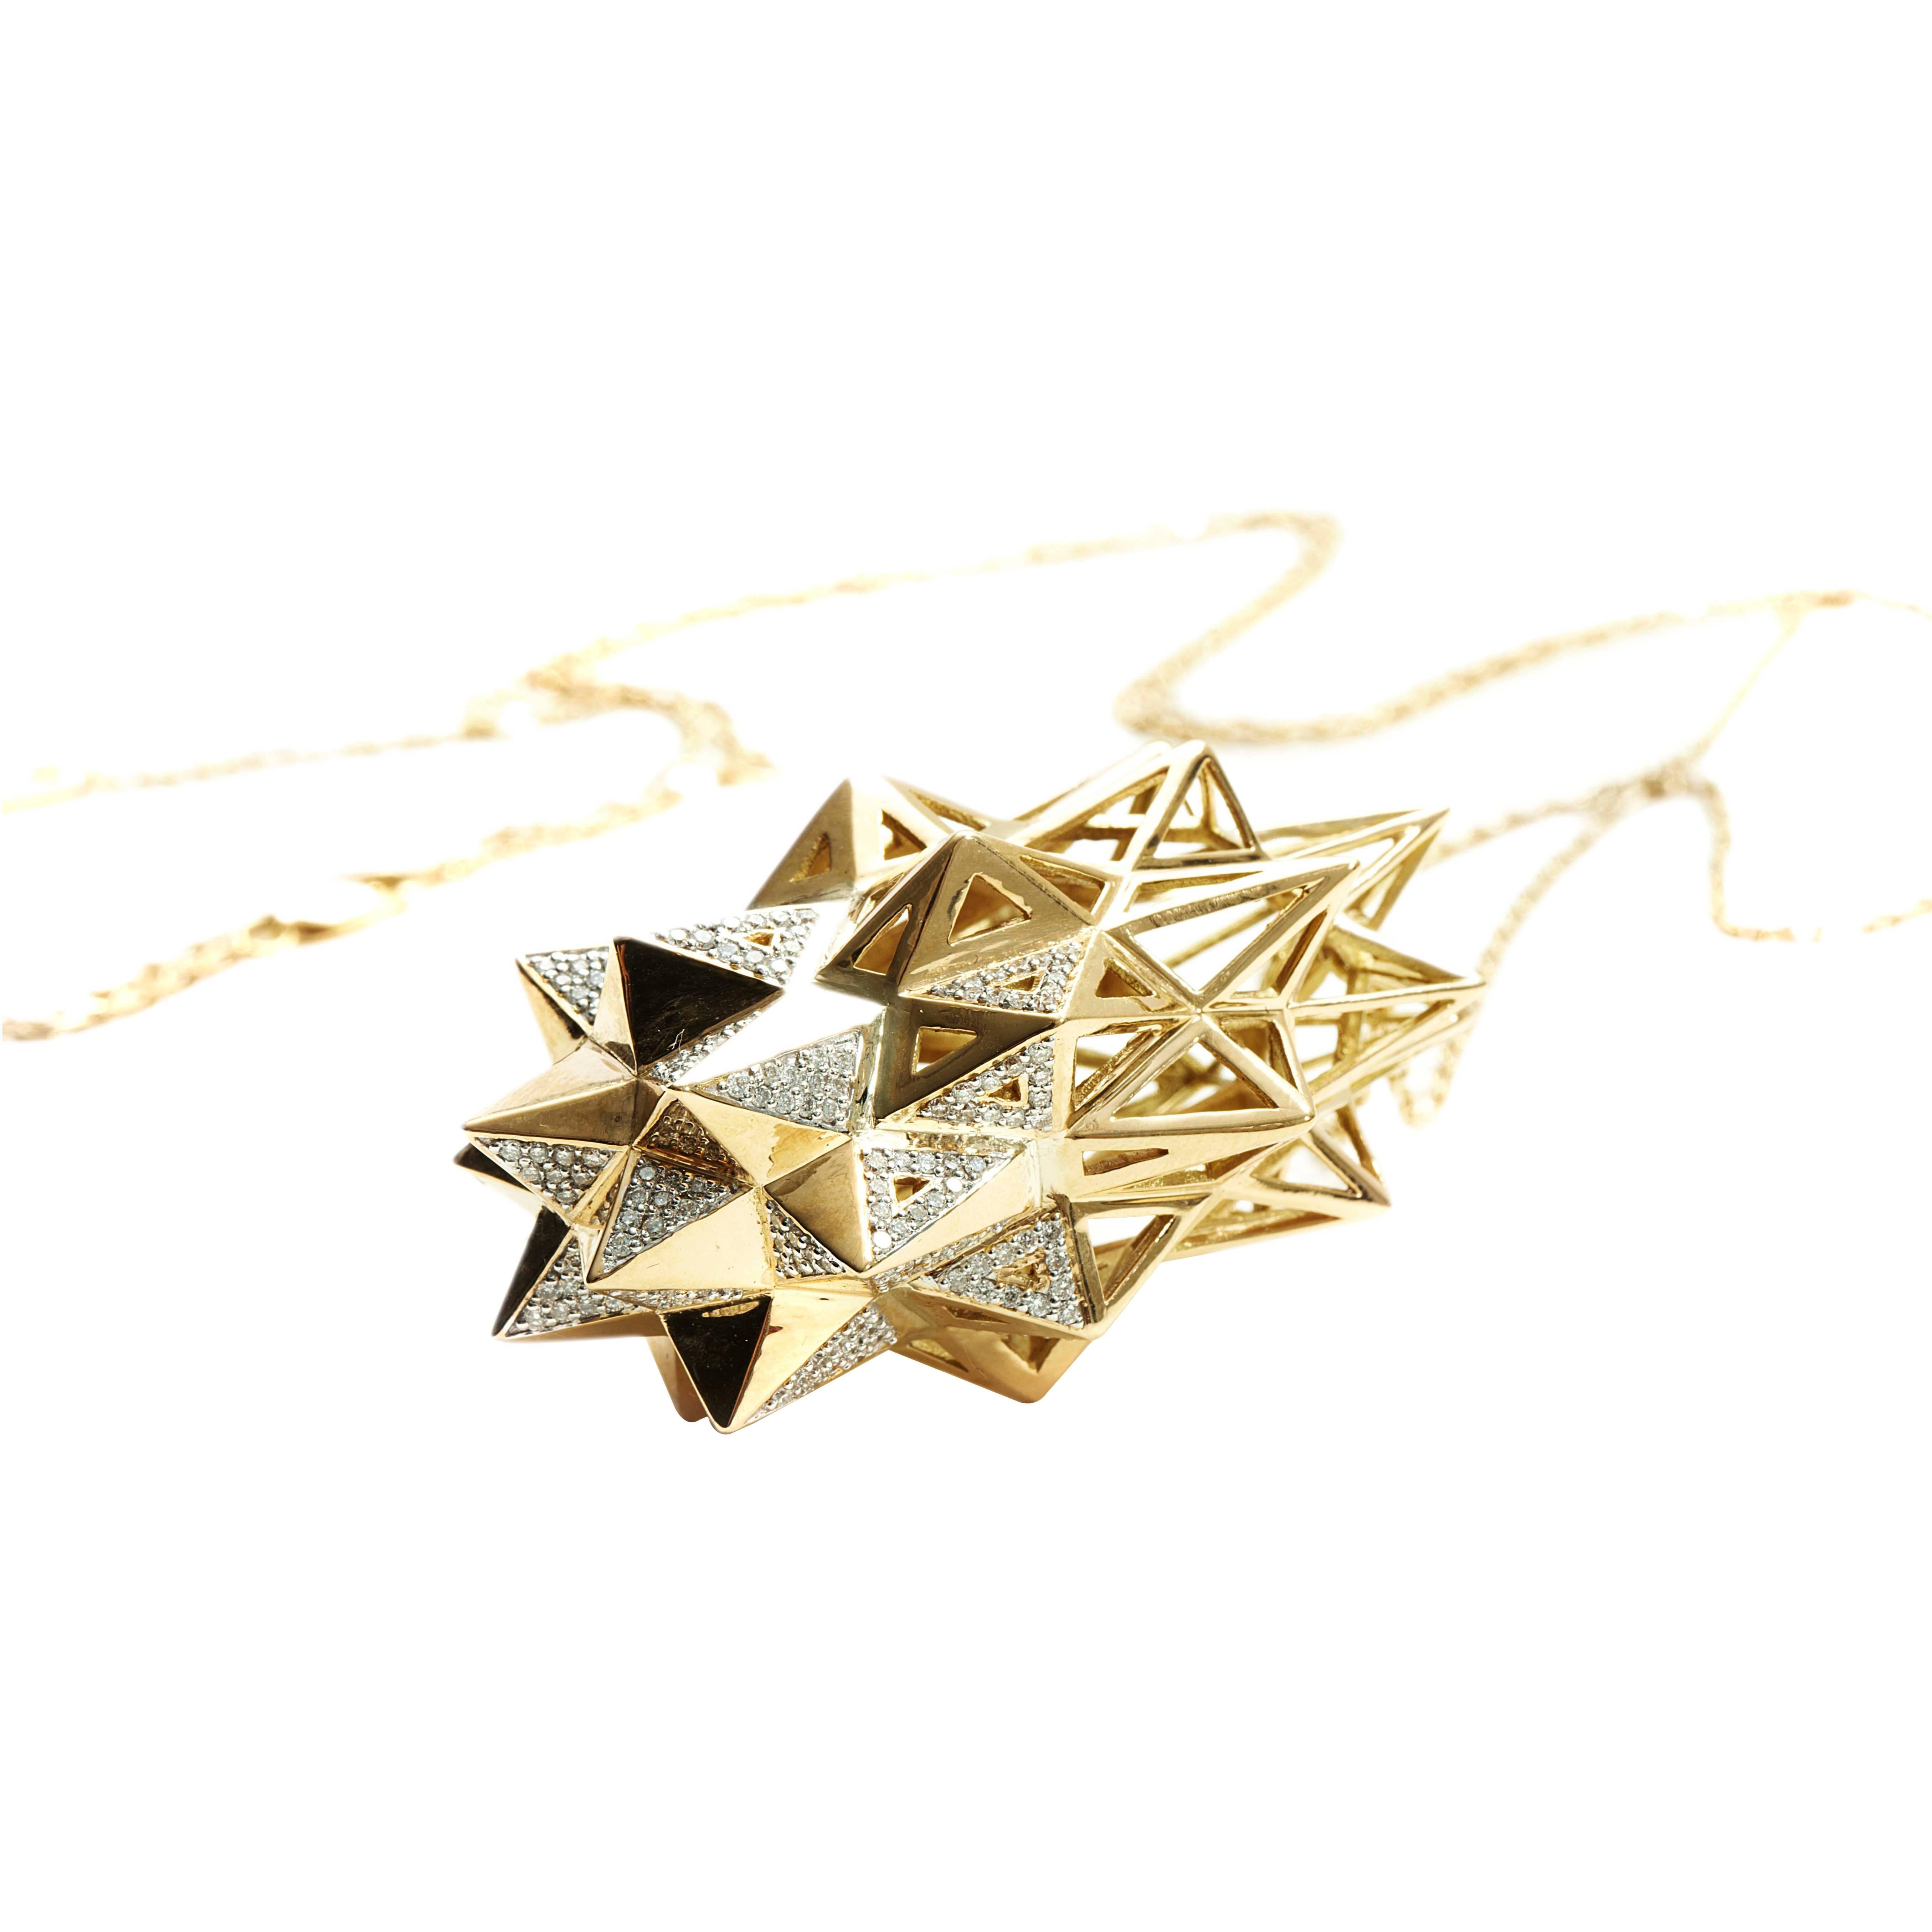 One of a Kind Large Stellated Diamond 18K Gold Pendant